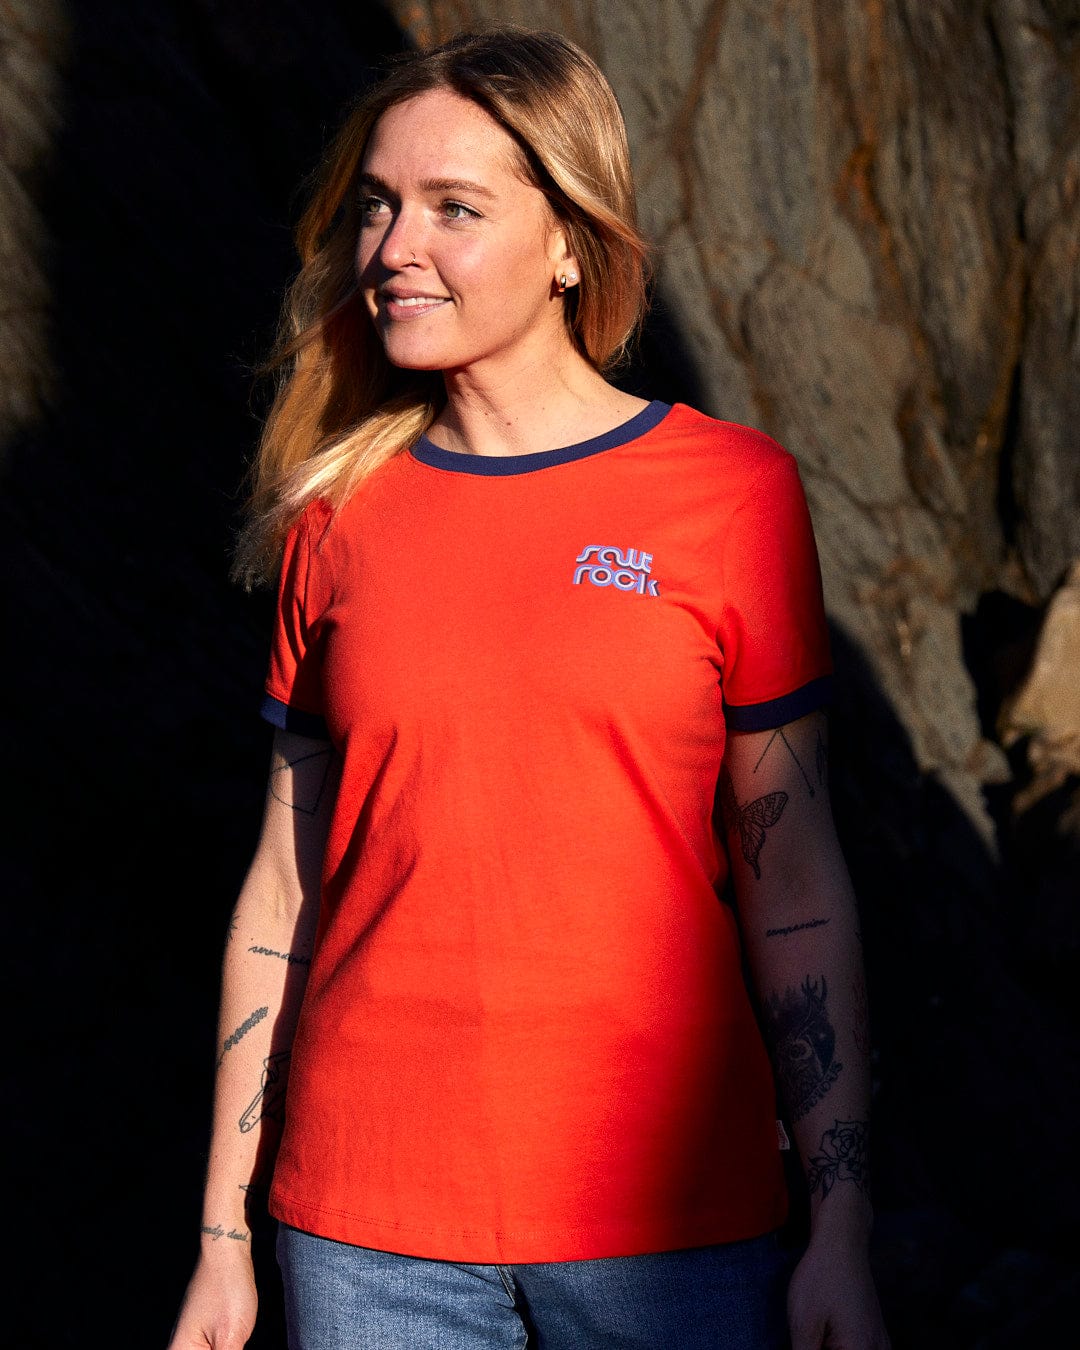 A woman wearing an Retro Wave Mini - Womens Short Sleeve T-Shirt - Red with Saltrock branding in front of rocks.